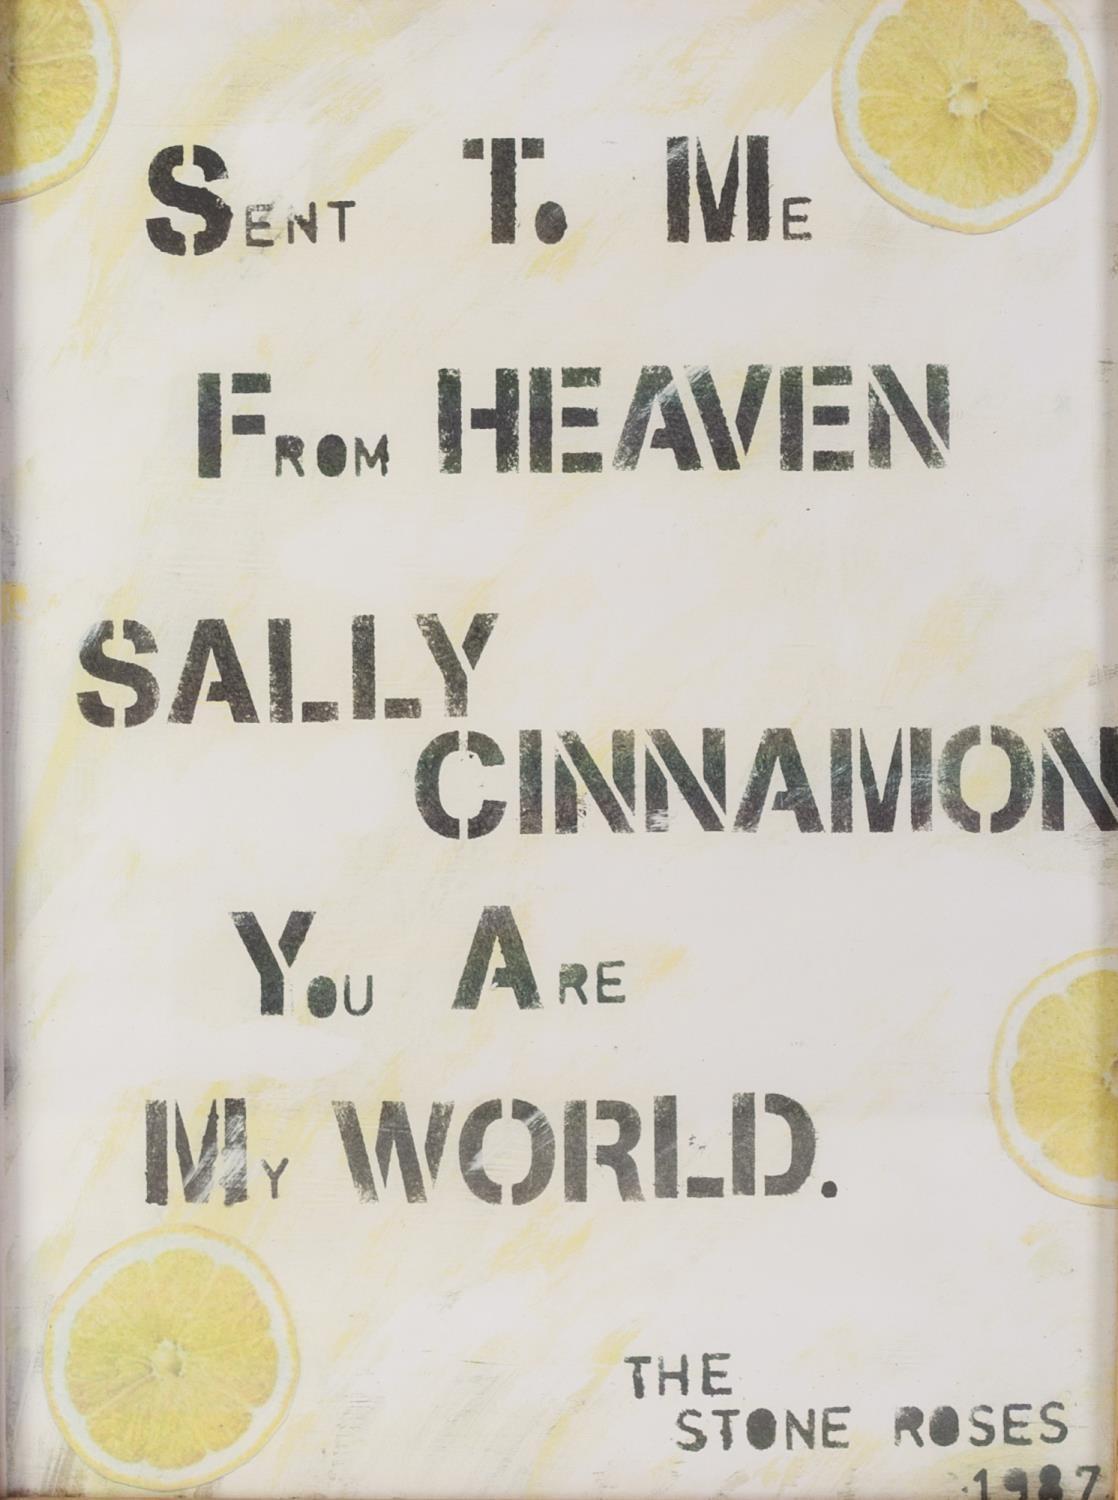 ?SENT TO ME FROM HEAVEN, SALLY CINNAMON YOU ARE MY WORLD?, SMALL STONE ROSES POSTER, 1987, 15 ¼? x